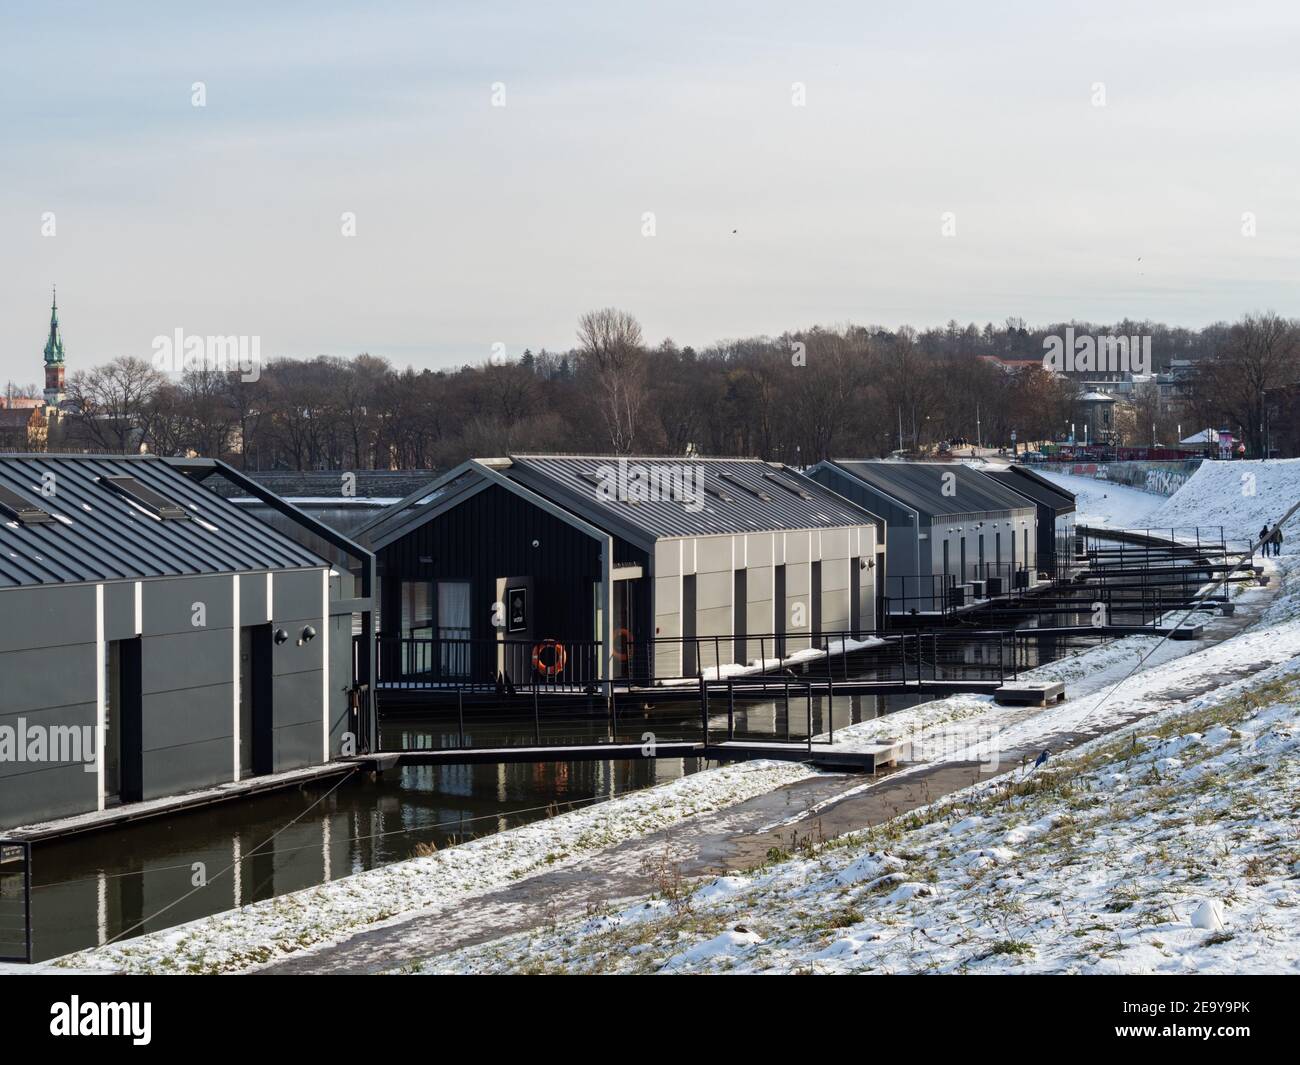 31/01/2021 - Poland Cracow - boat hotel at the banks of Vistula River, closed due to pandemic of Covid-19 Stock Photo